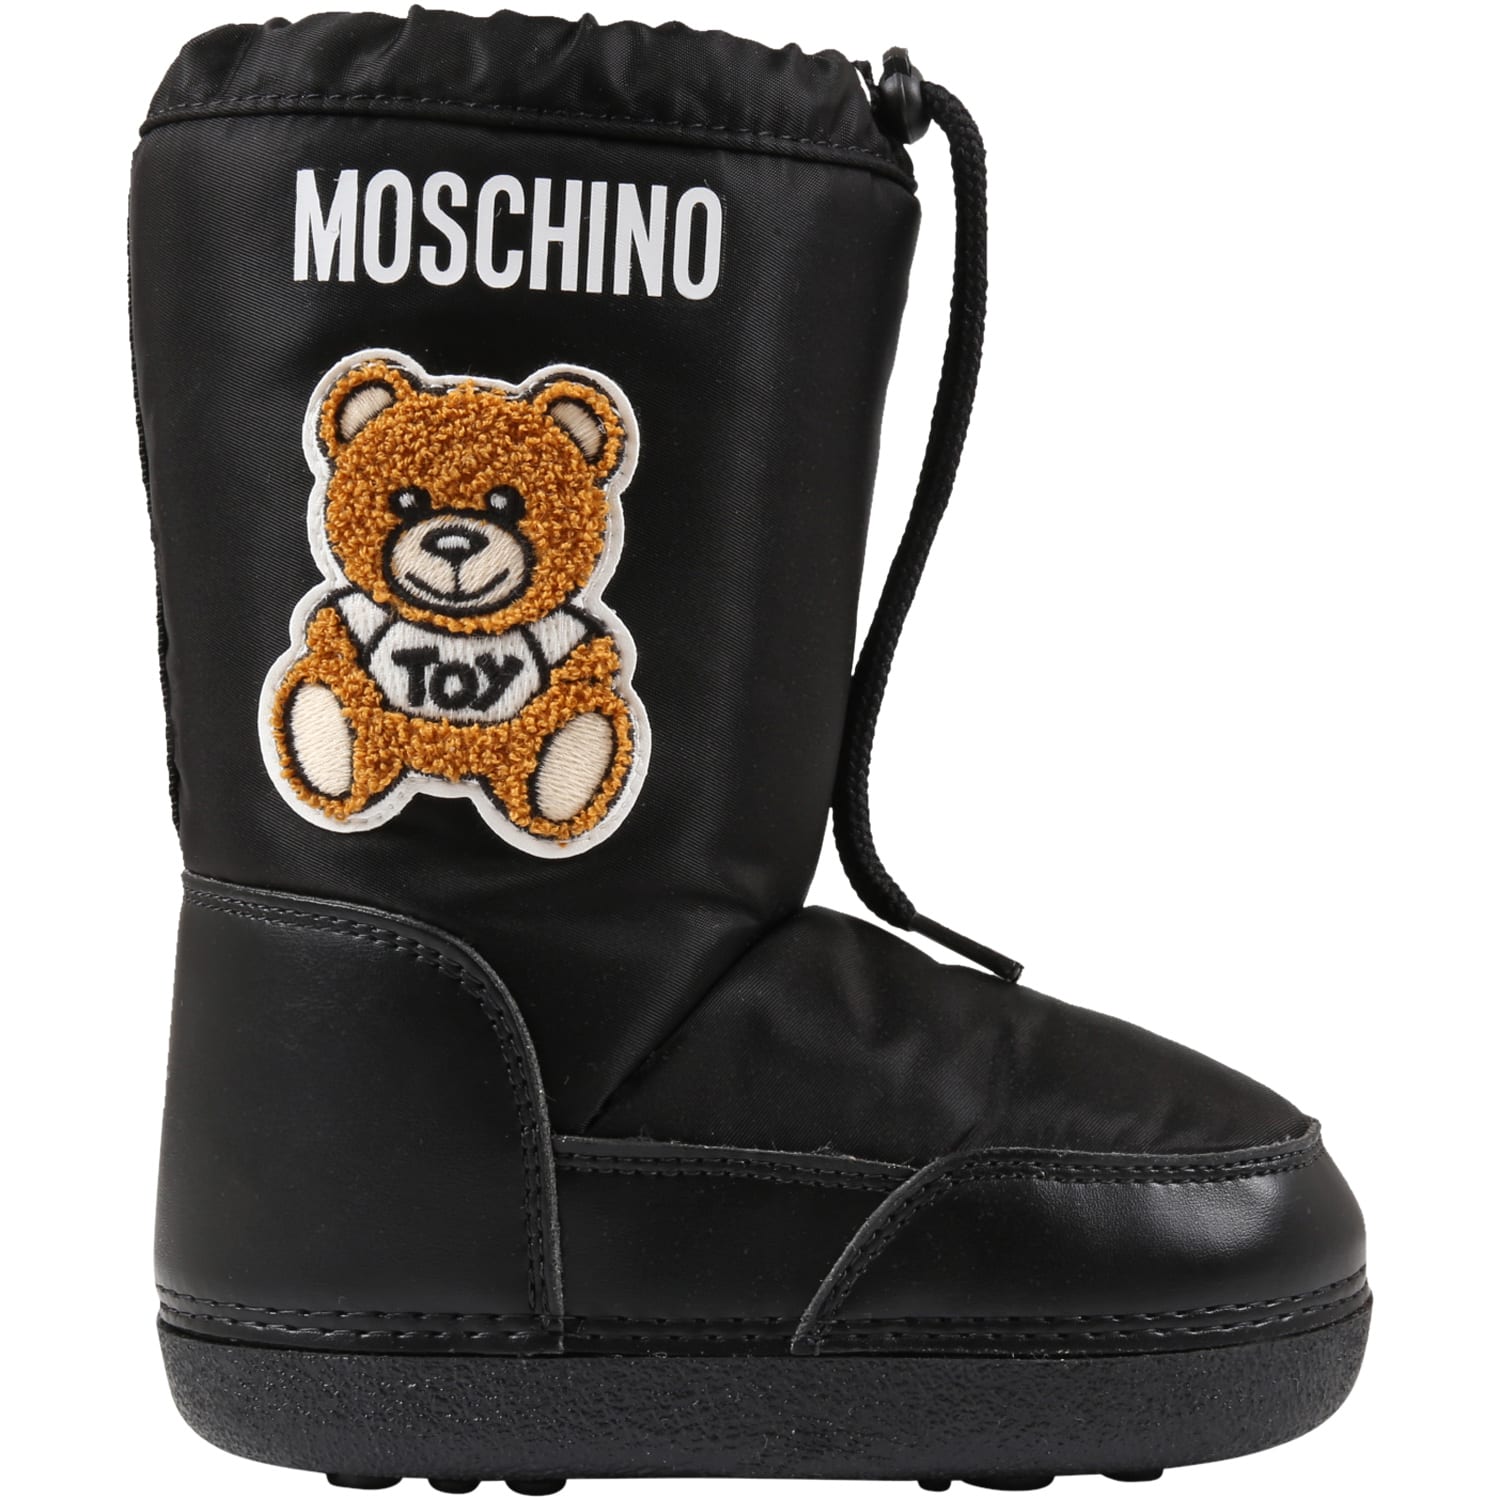 Moschino Black Boots For Kids With Teddy Bear